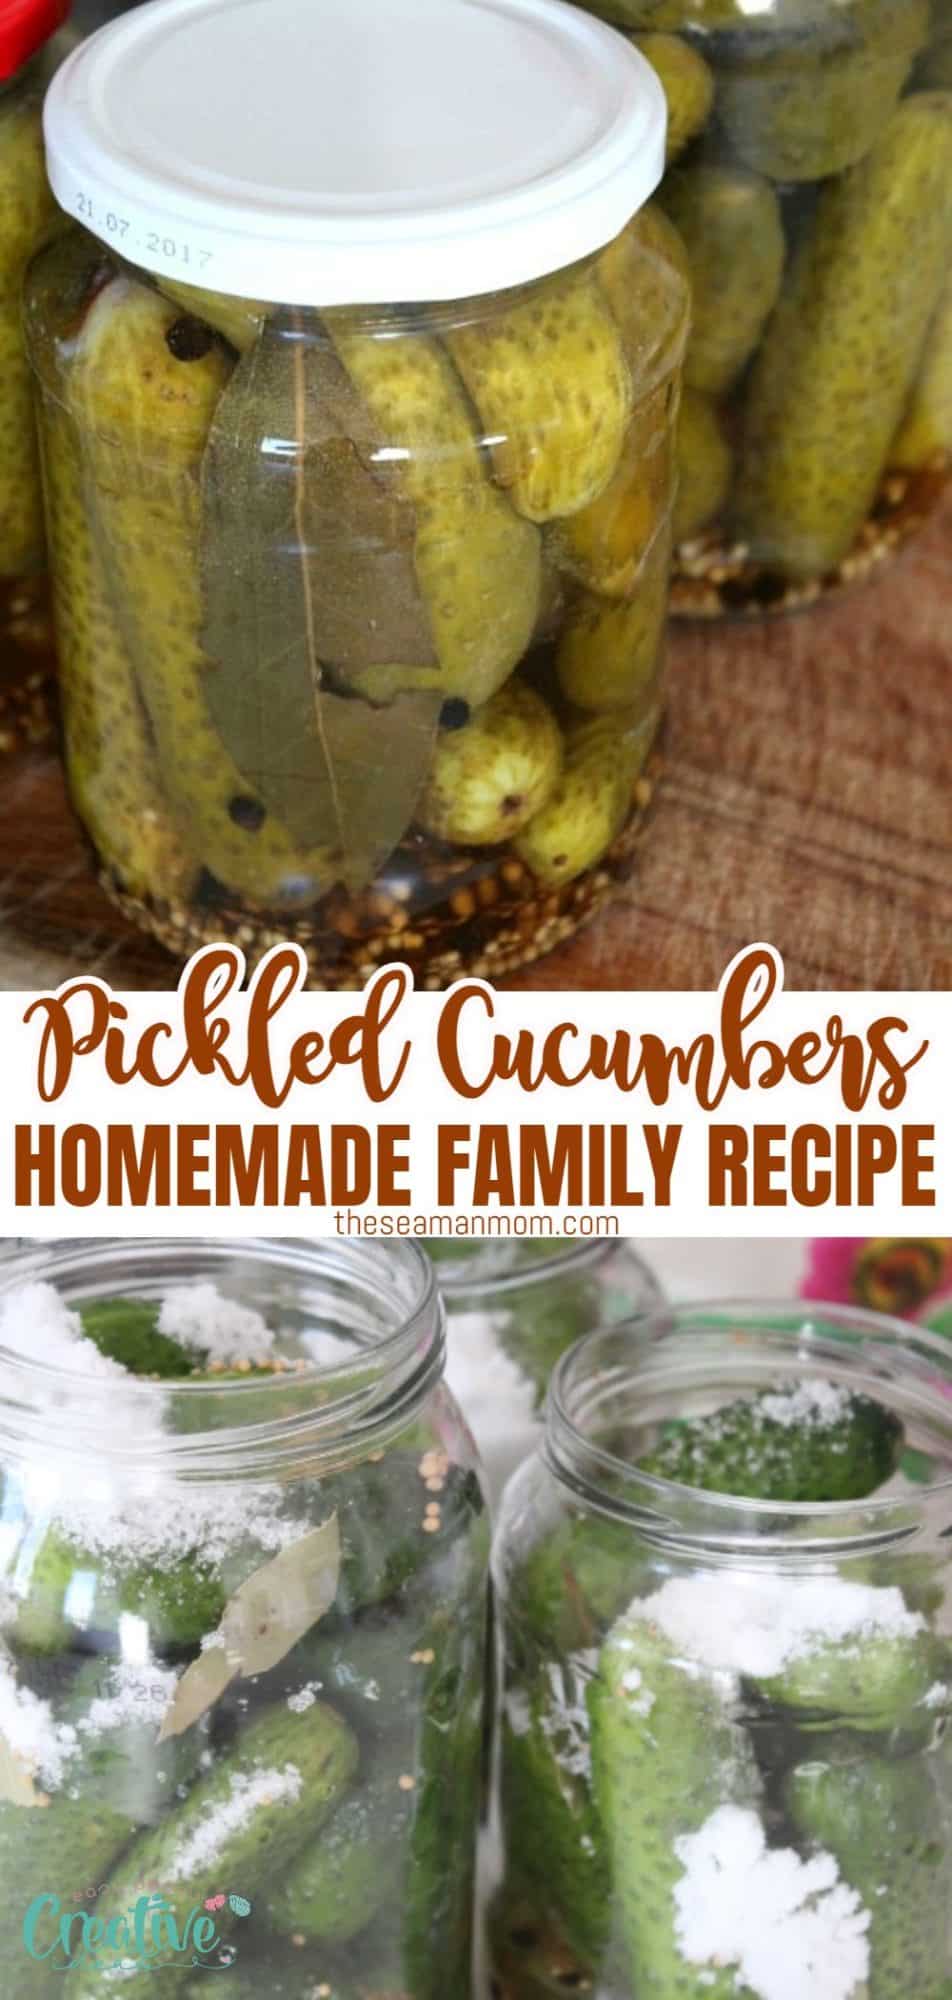 Pickled cucumbers in a jar made with a homemade family recipe